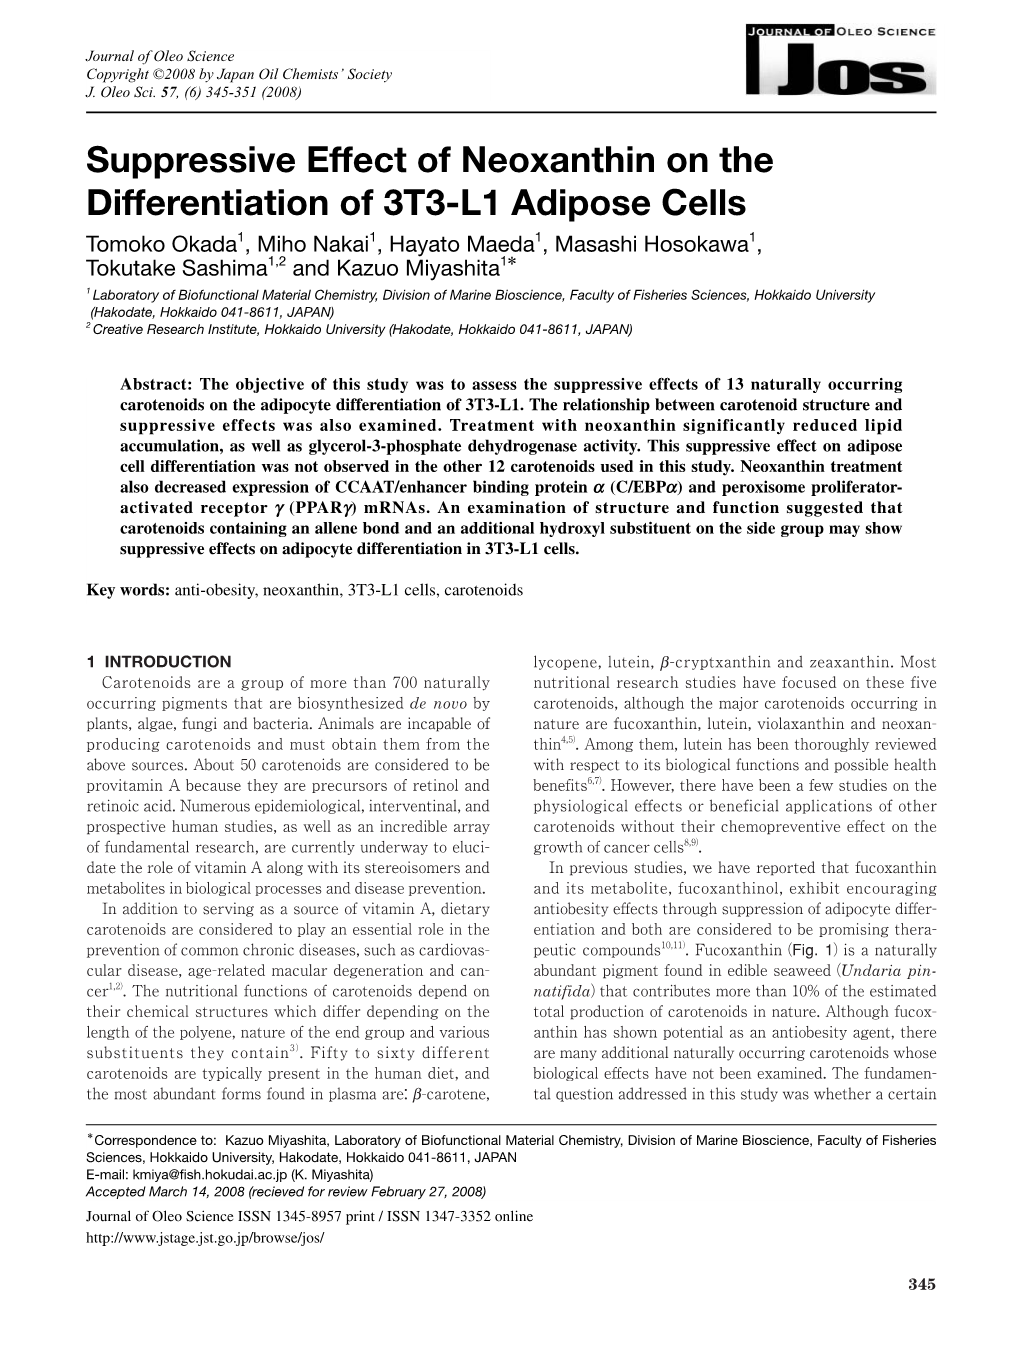 Suppressive Effect of Neoxanthin on the Differentiation of 3T3-L1 Adipose Cells